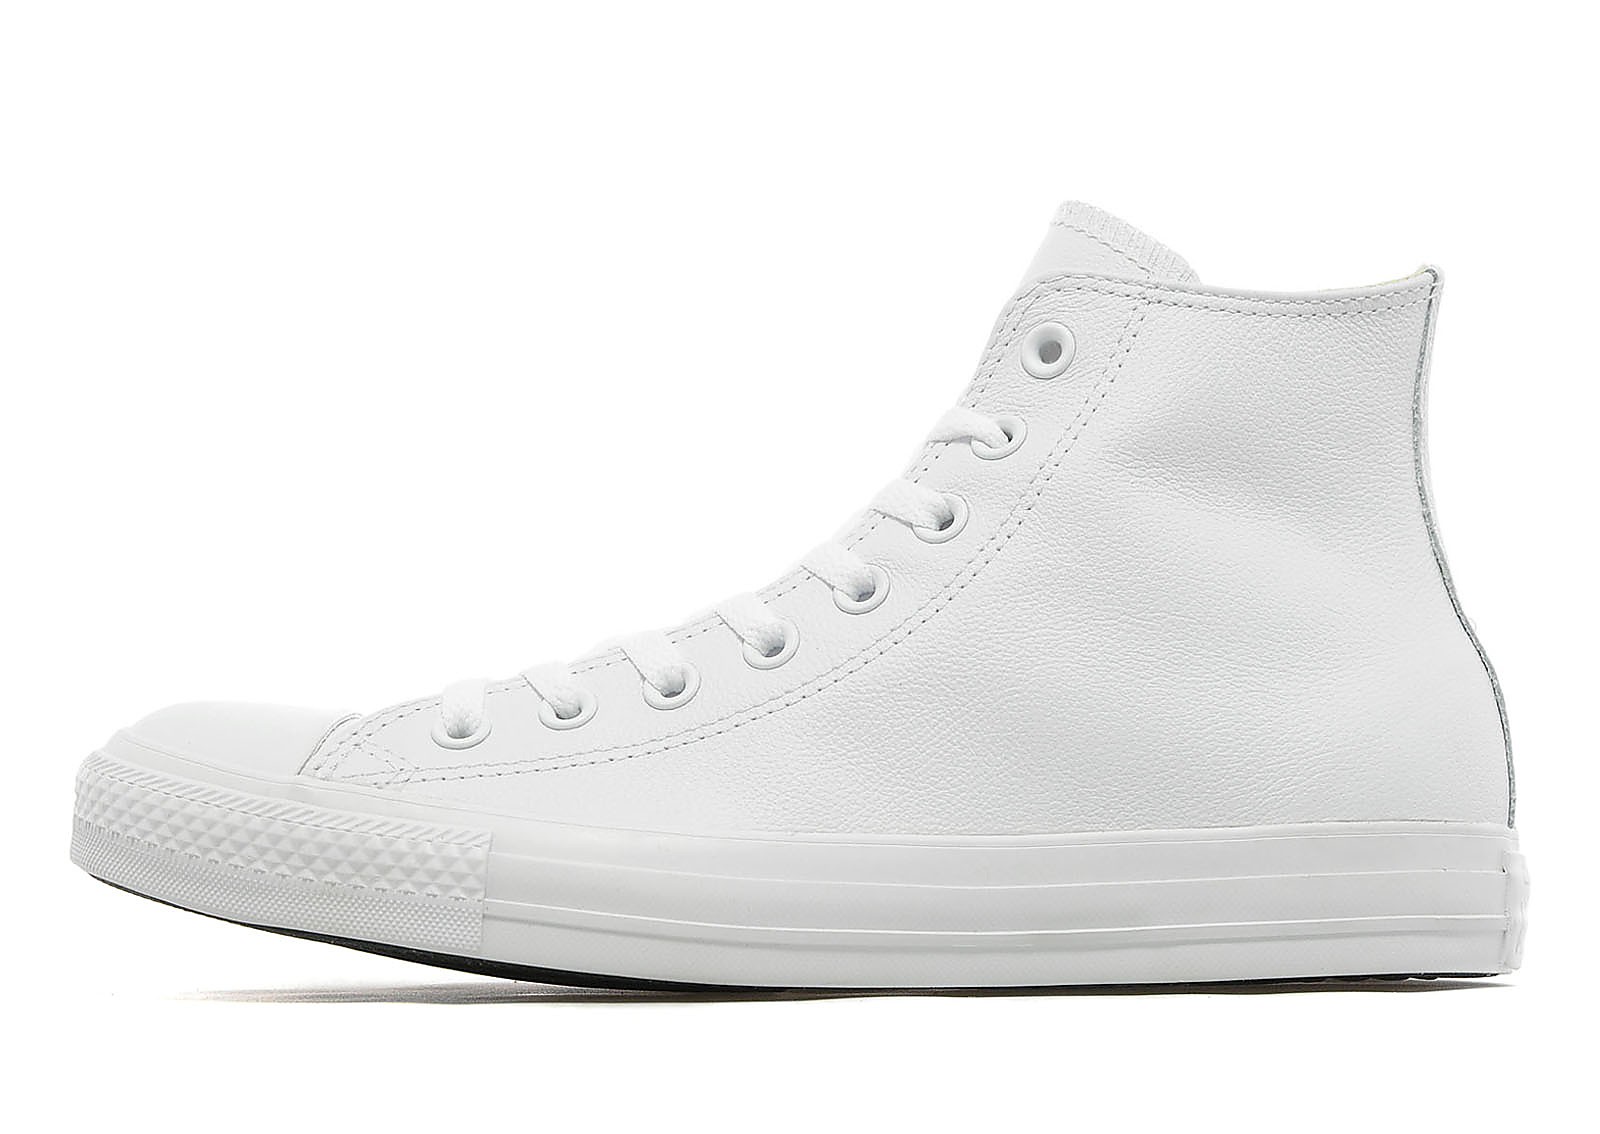 Converse All Star Hi Leather - Compare Prices at Foundem